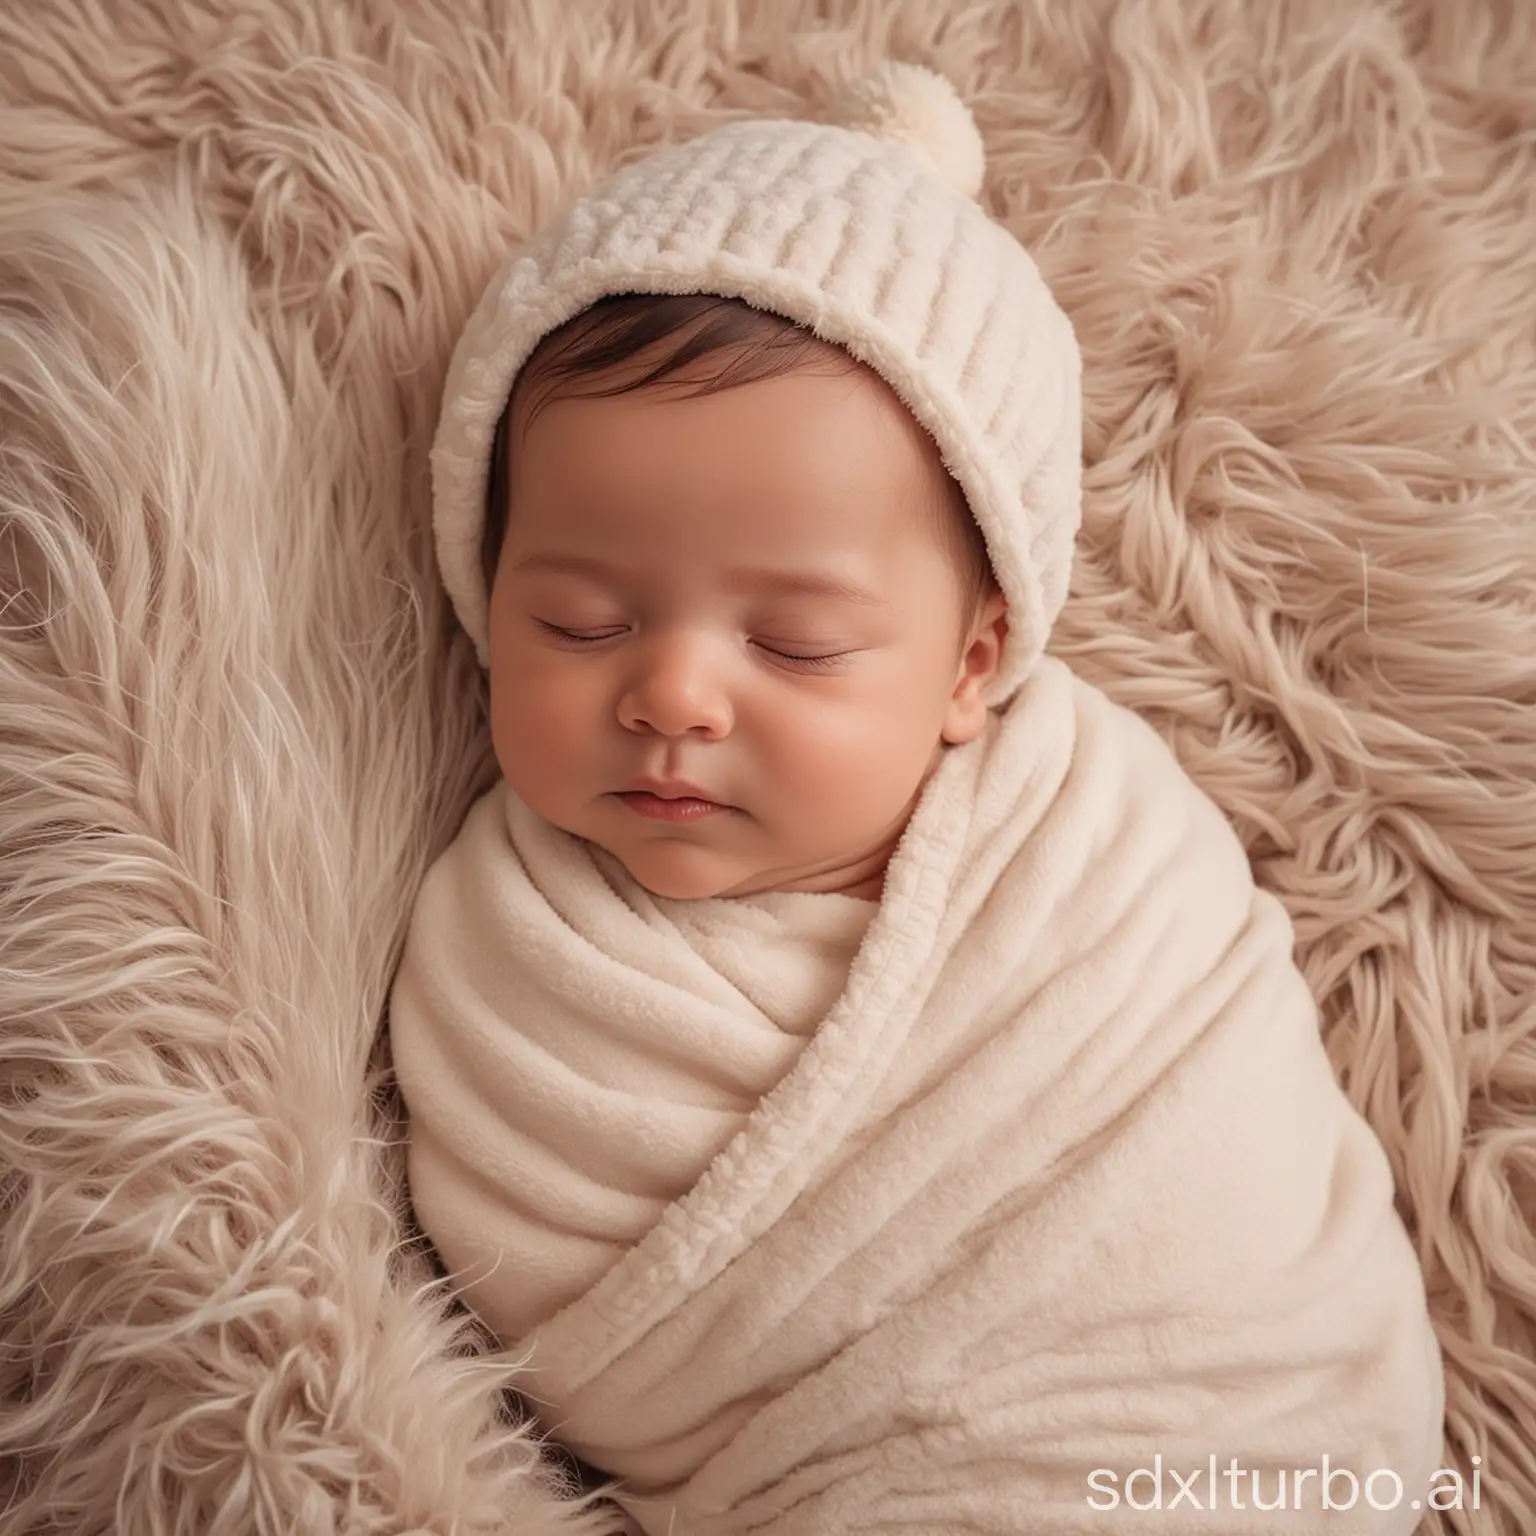 A sleeping baby lying on a soft, fluffy blanket. The baby is wearing a cute onesie and has a peaceful expression on their face. The background is a soft, muted color that complements the baby's skin tone.